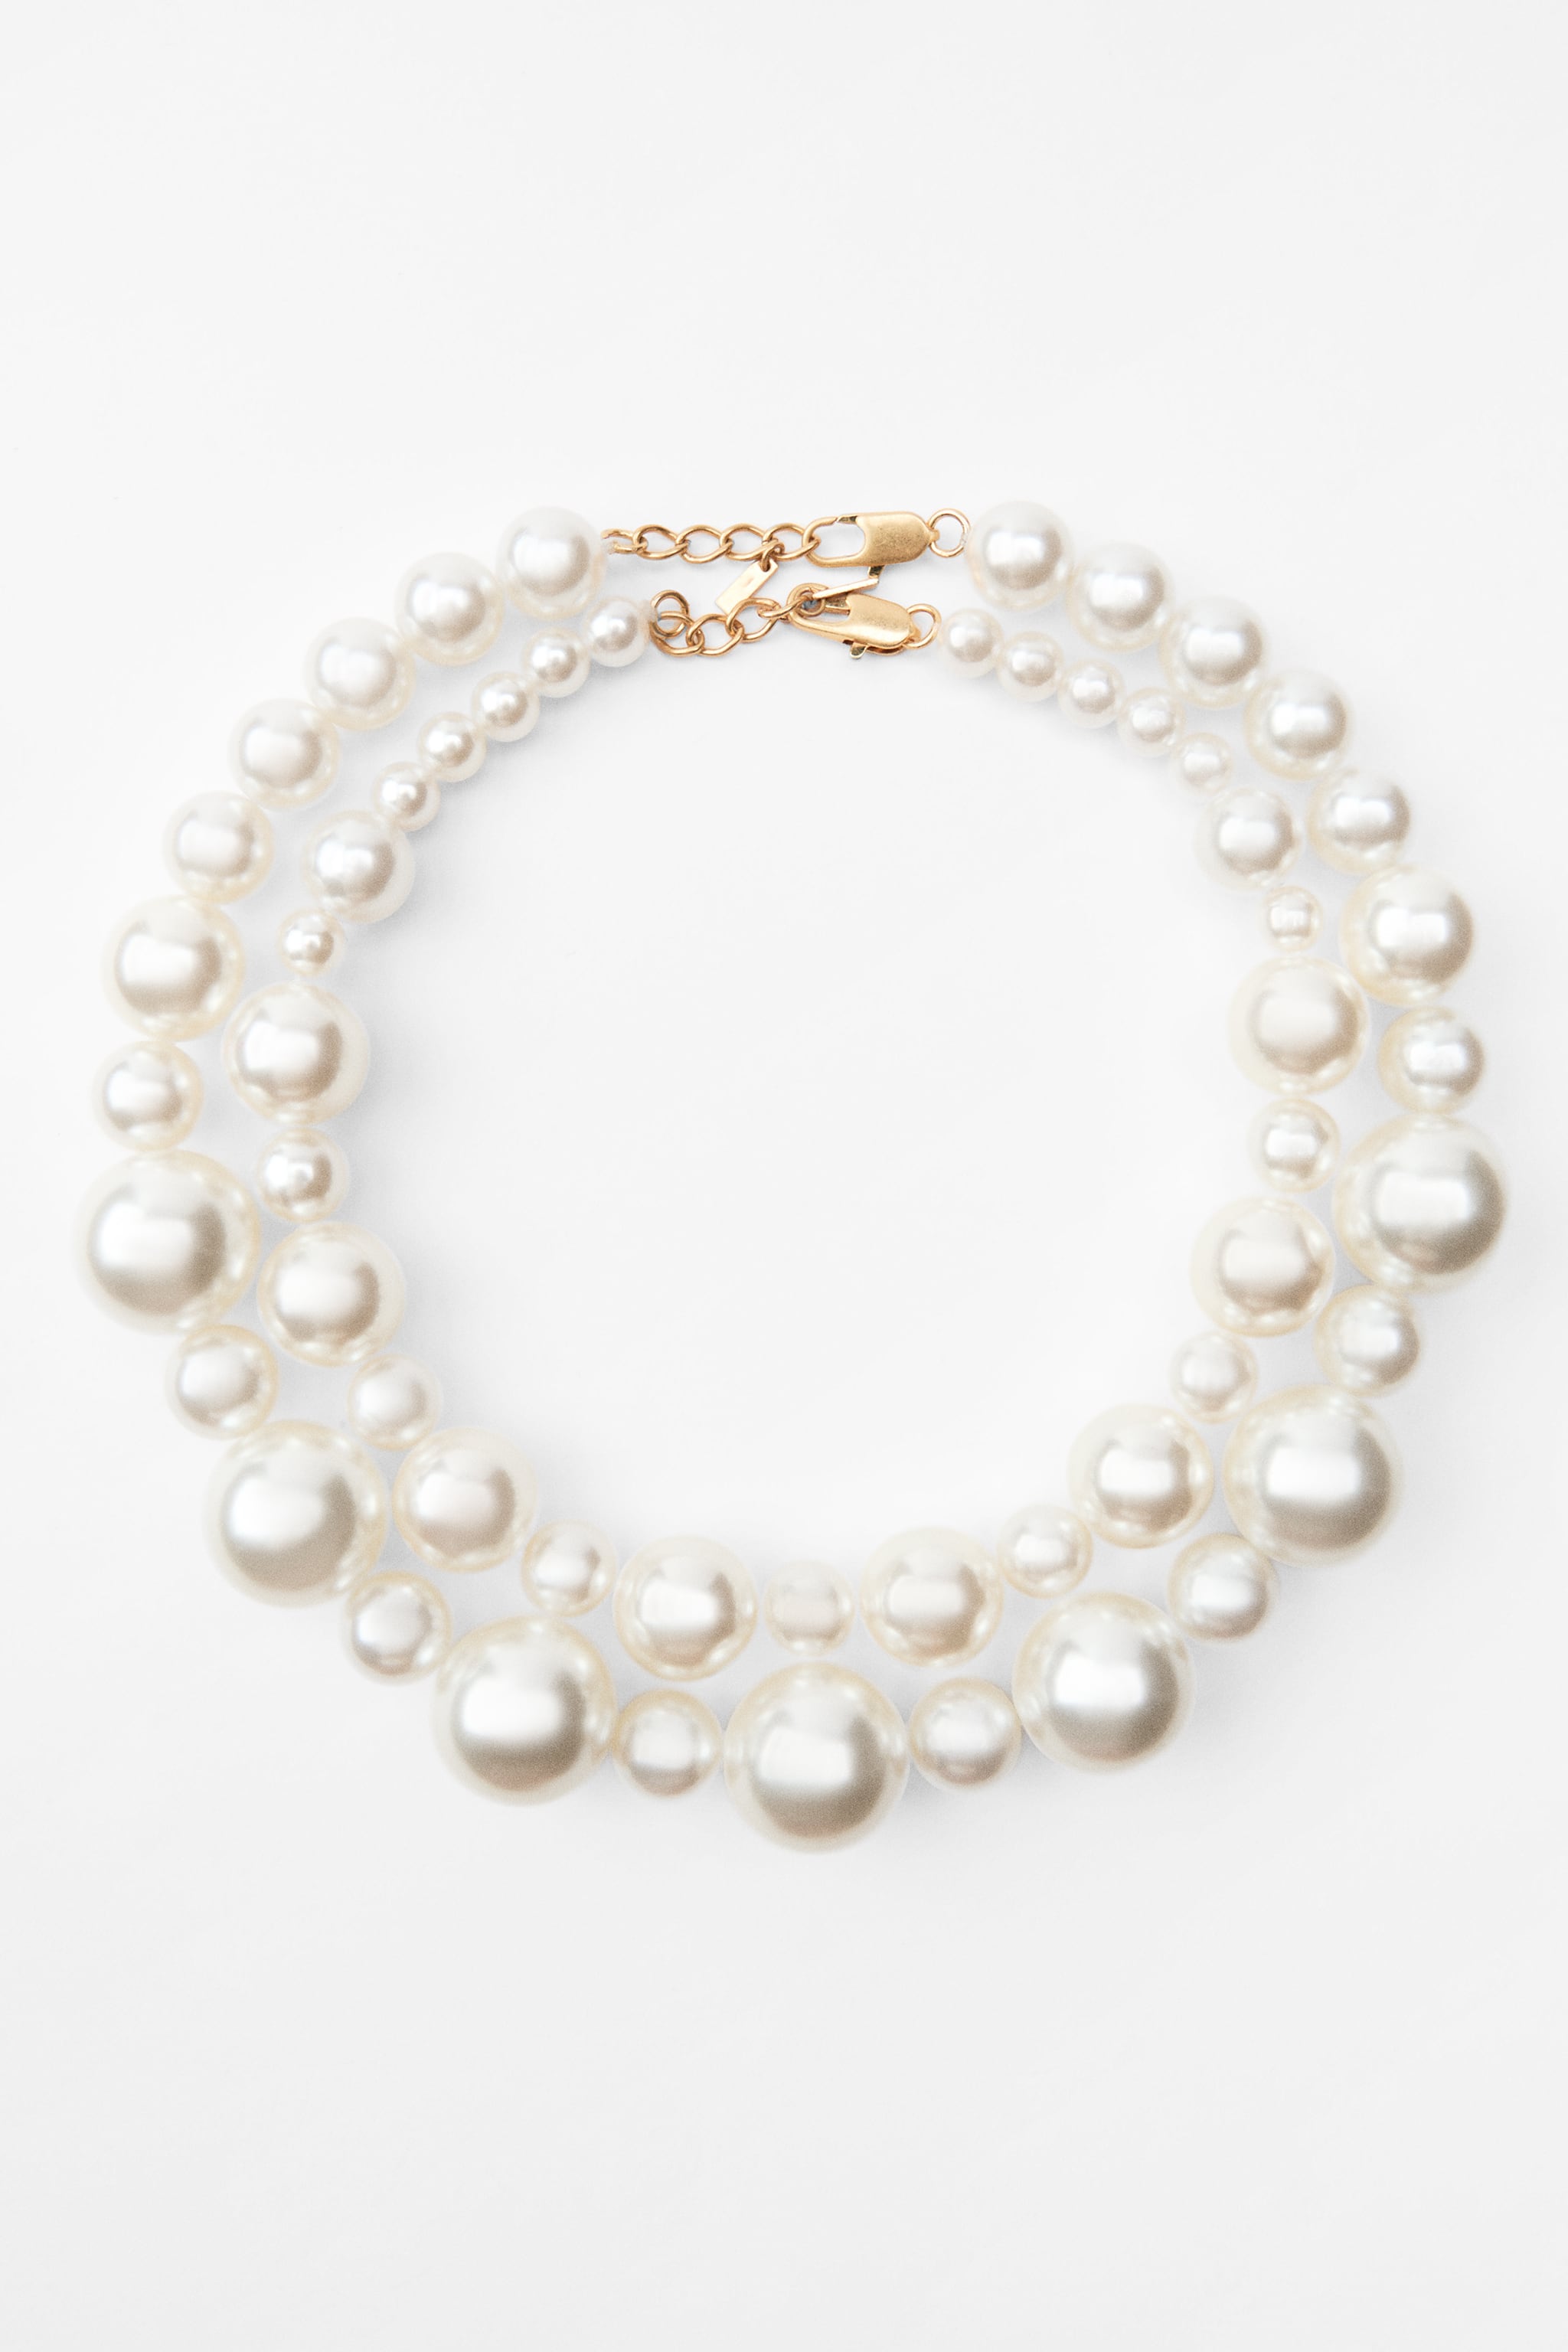 PACK OF PEARL NECKLACES